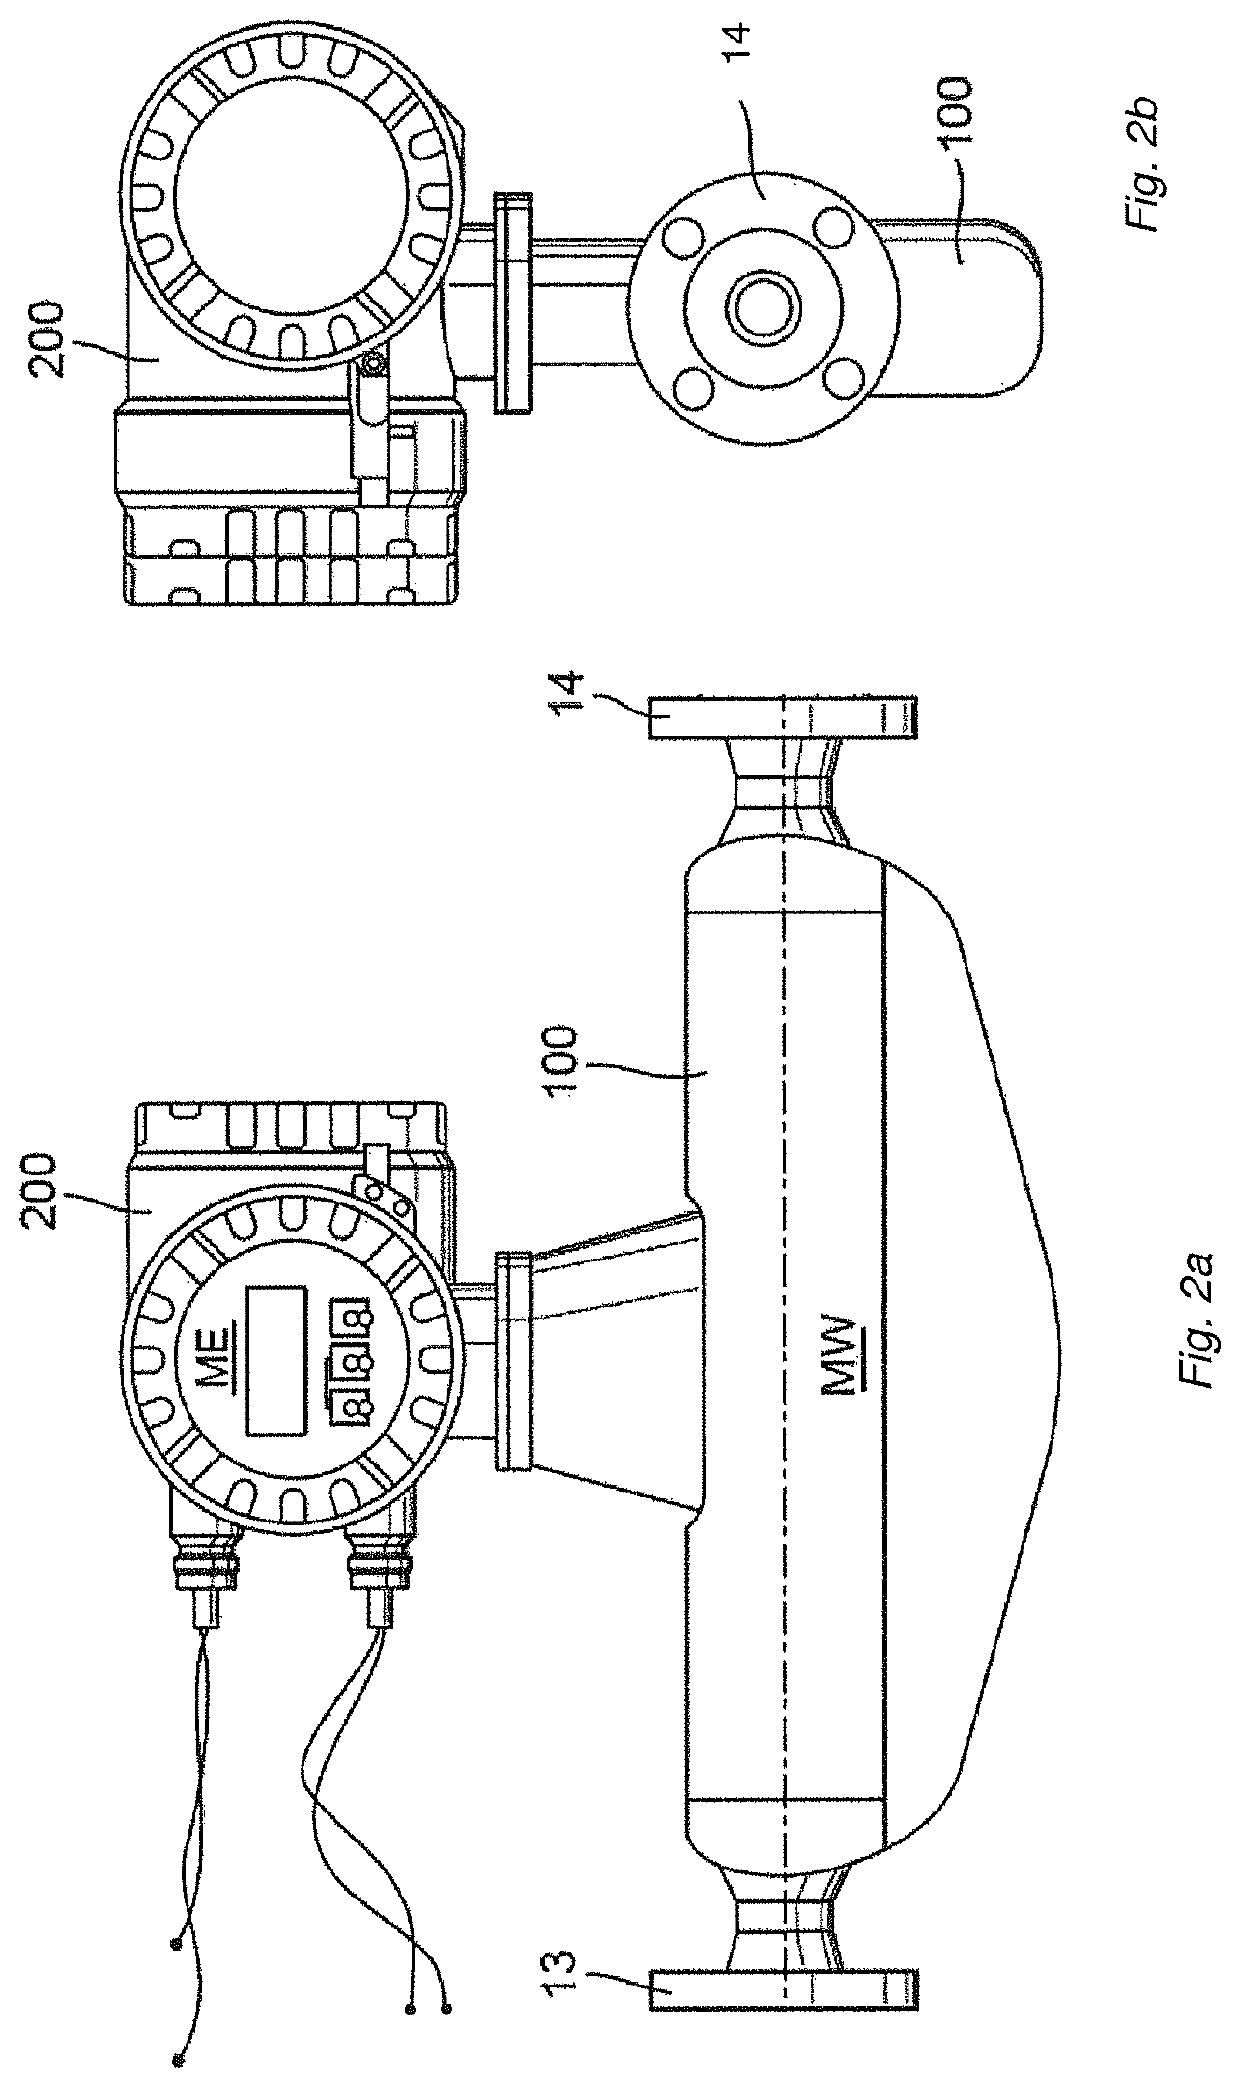 Method for affixing a metal tube to a metal body